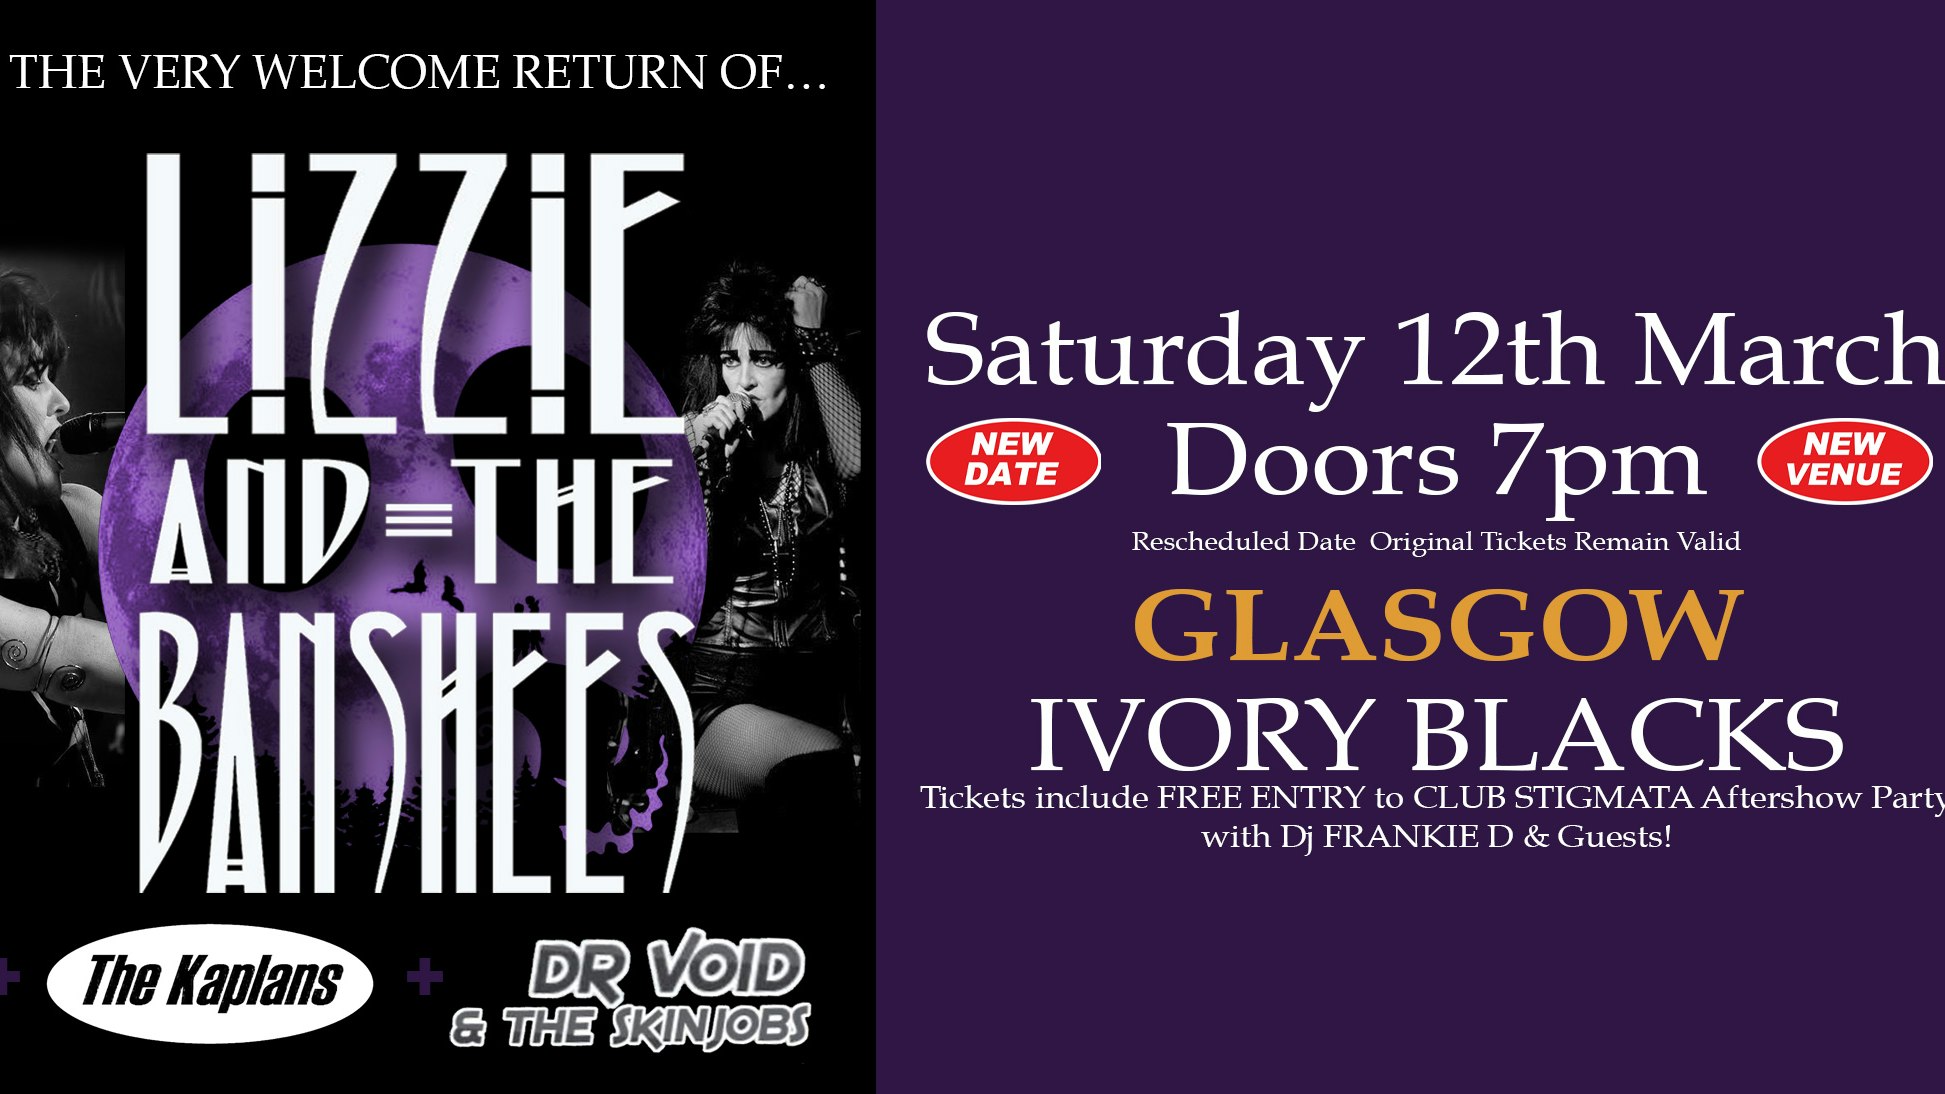 LIZZIE AND THE BANSHESS  (TRIBUTE BAND) NEW DATE & NEW VENUE + THE KAPLANS + Dr Void & The Skinjobs